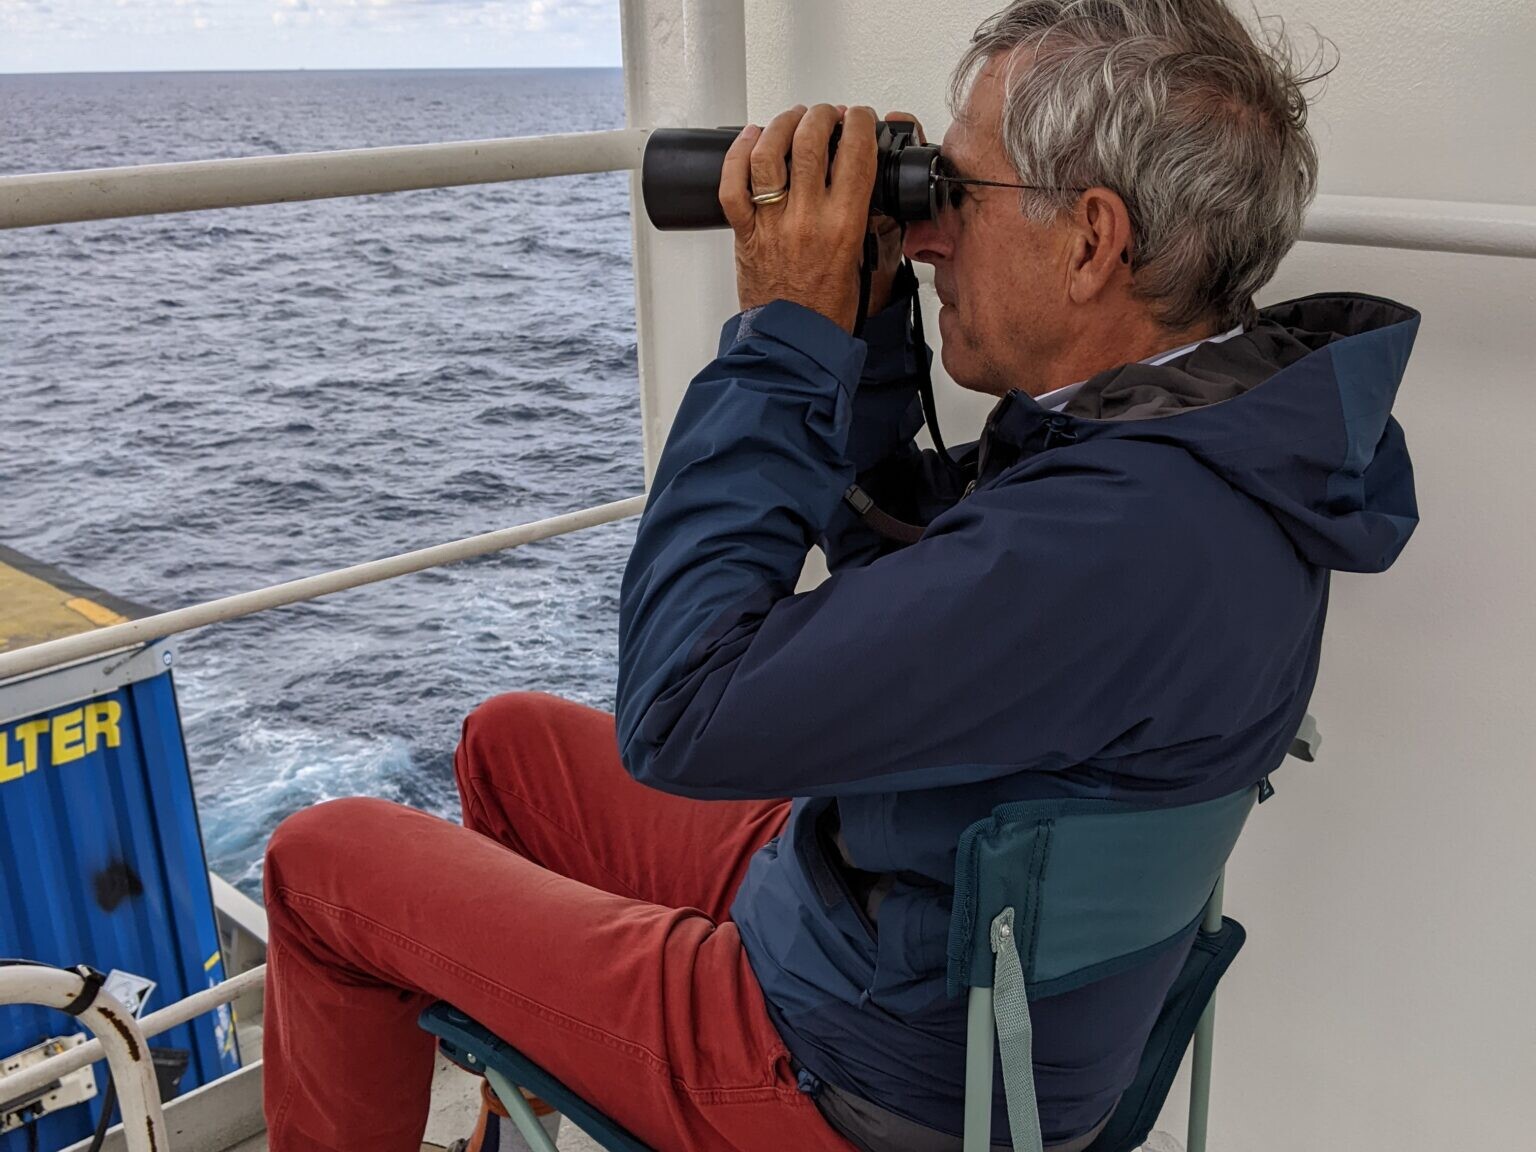 man looks through binoculars with view of sea and containers